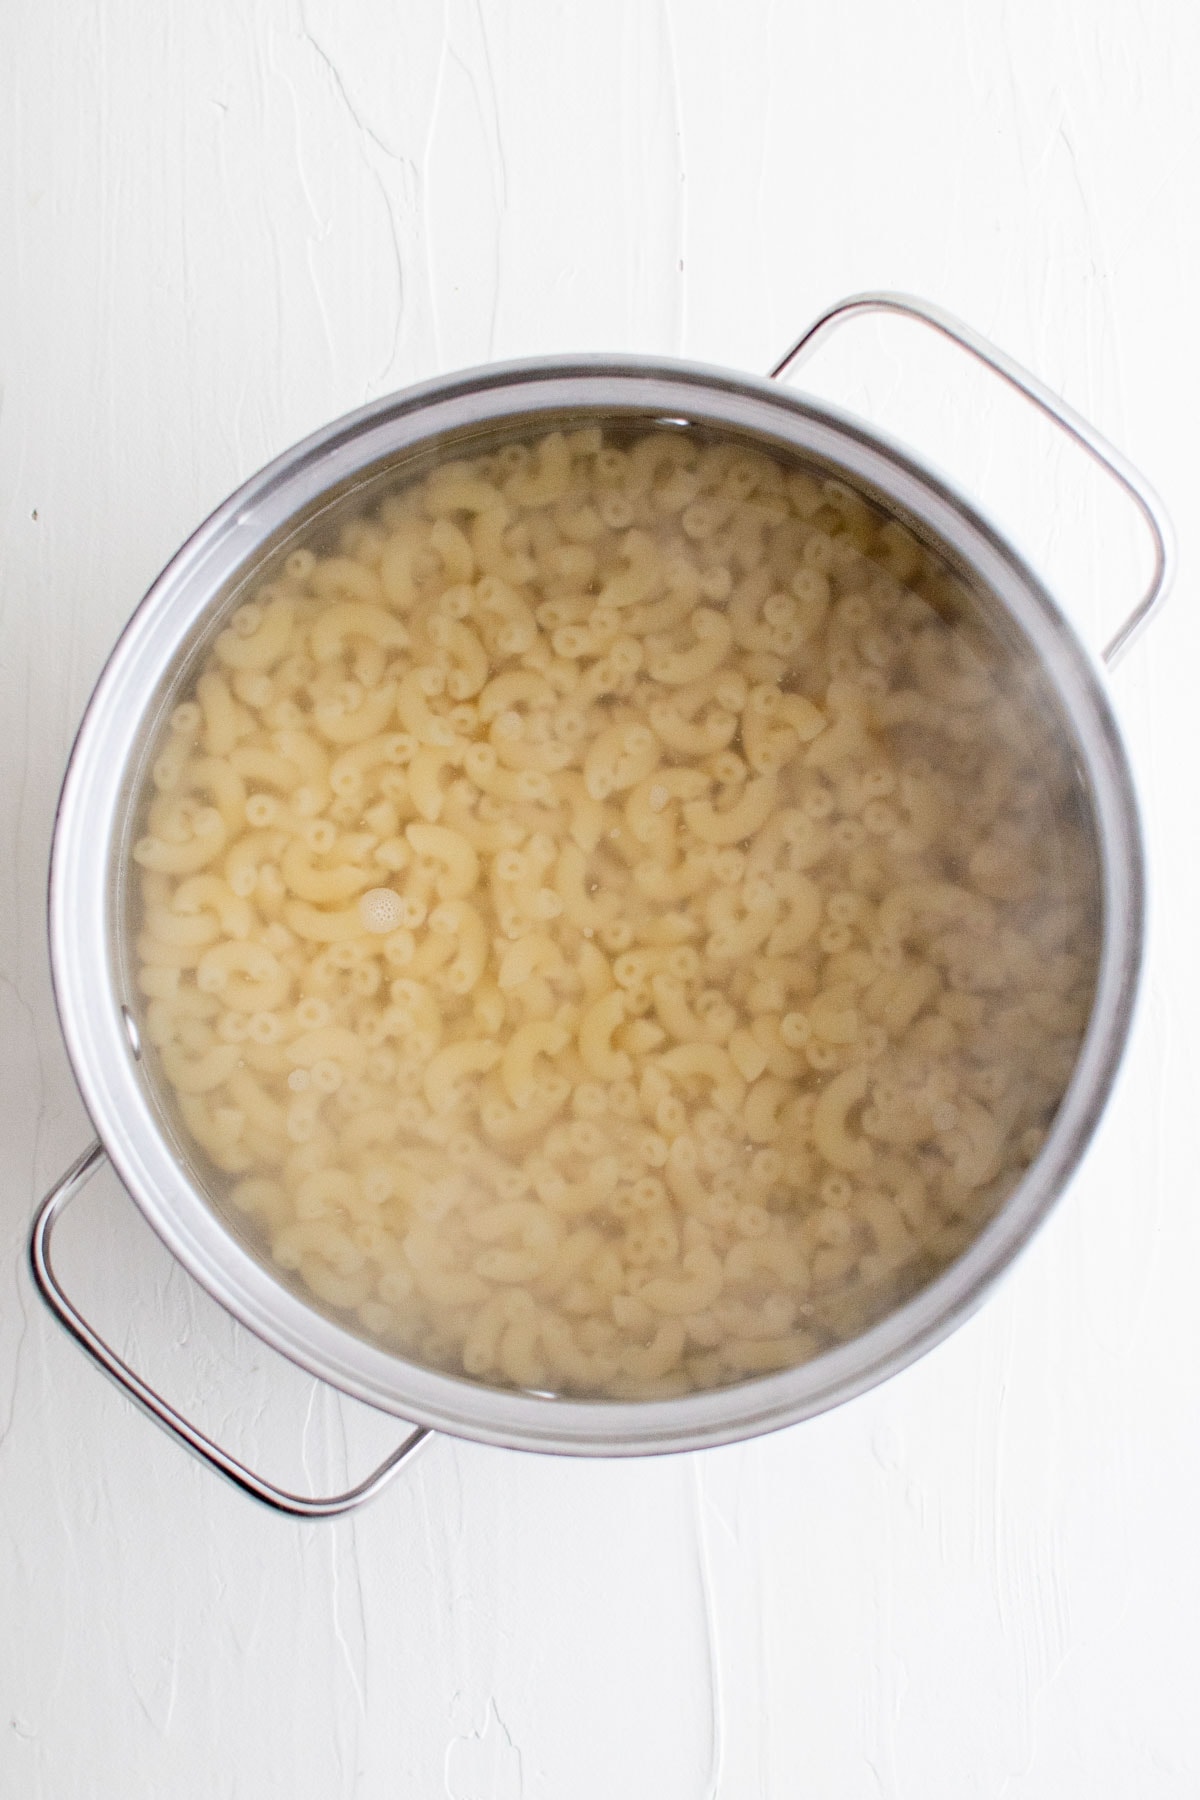 Macaroni is boiling water in a pot.